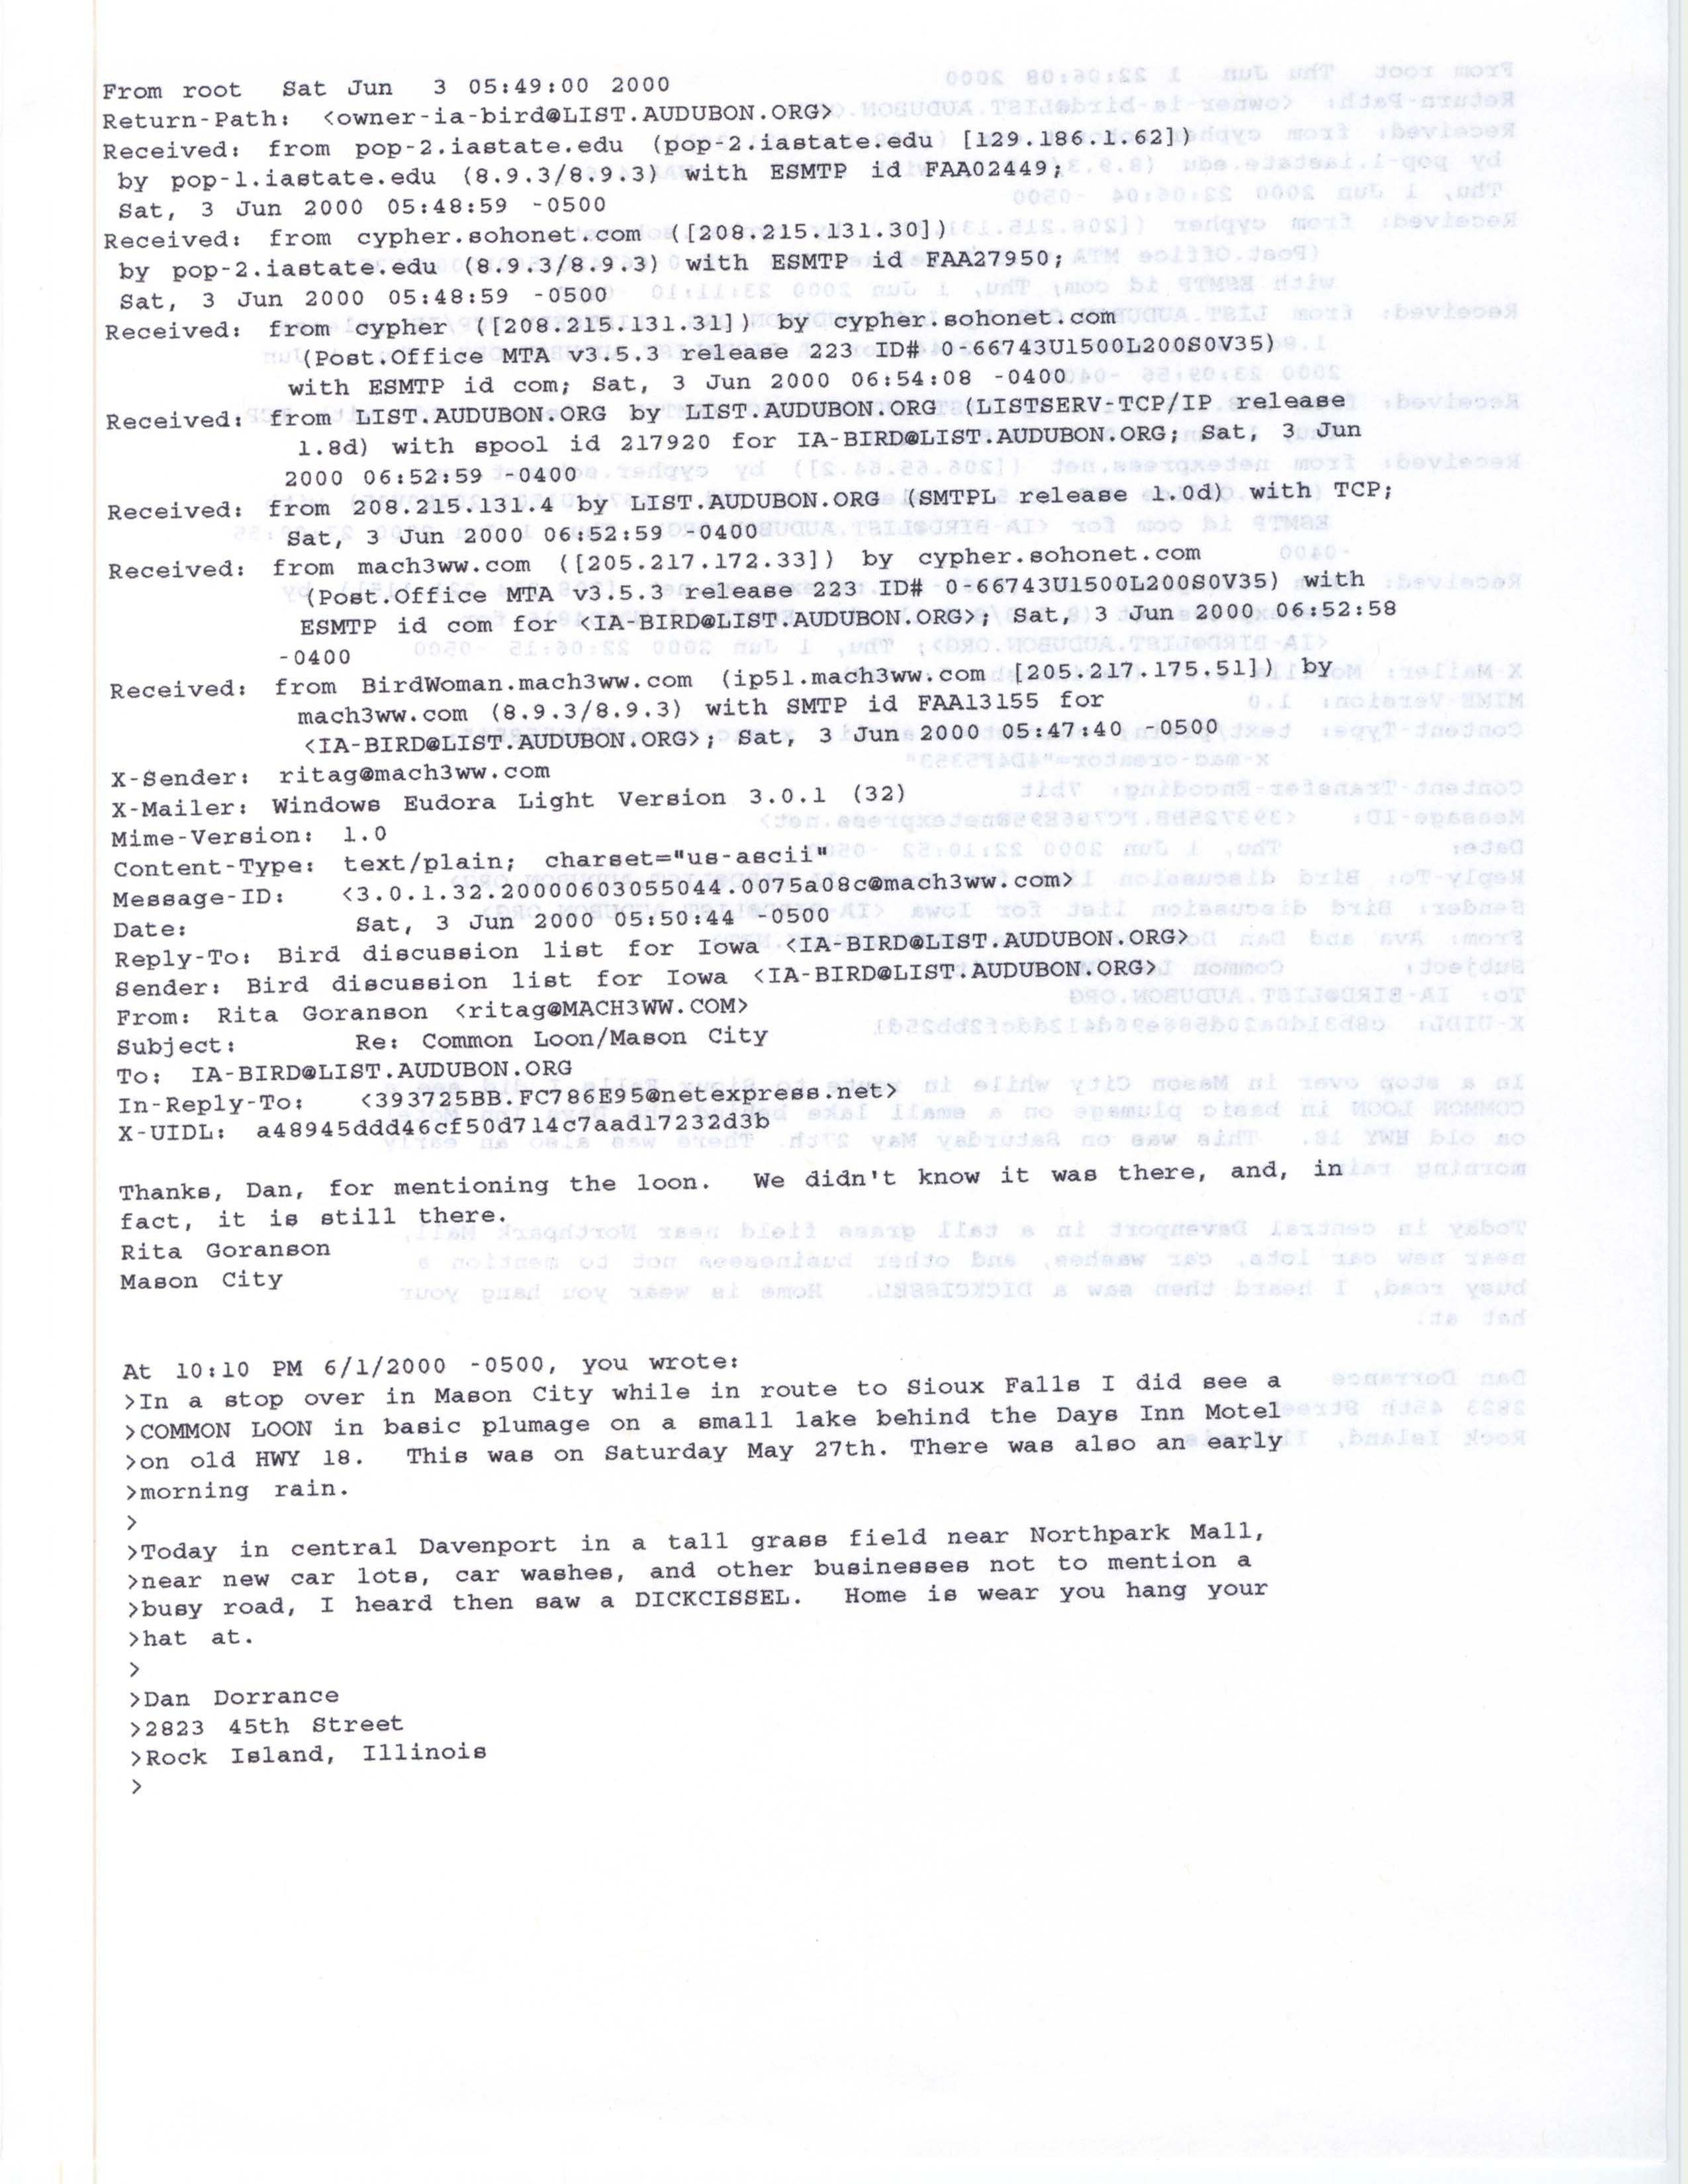 Dan Dorrance email to the IA-BIRD mailing list regarding Common Loon and Dickcissel sightings with a reply email from Rita Goranson, June 1 and June 3, 2000